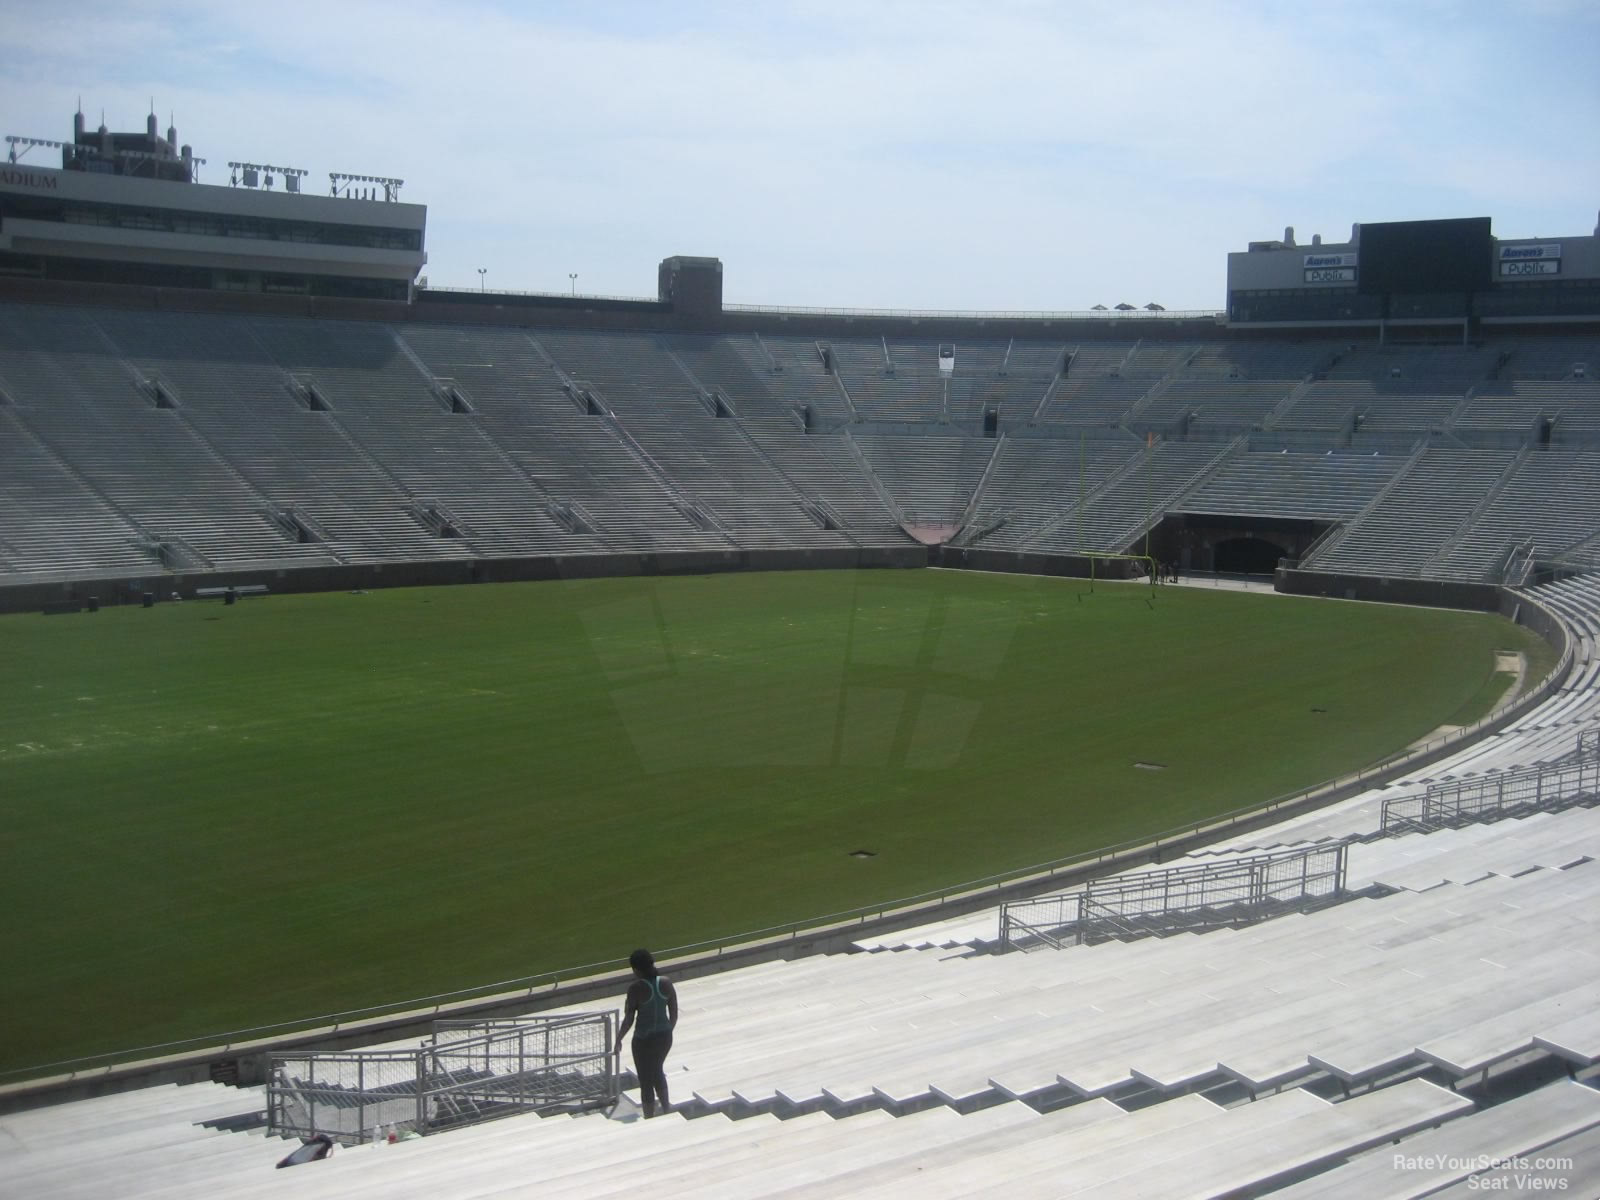 section 37, row 41 seat view  - doak campbell stadium